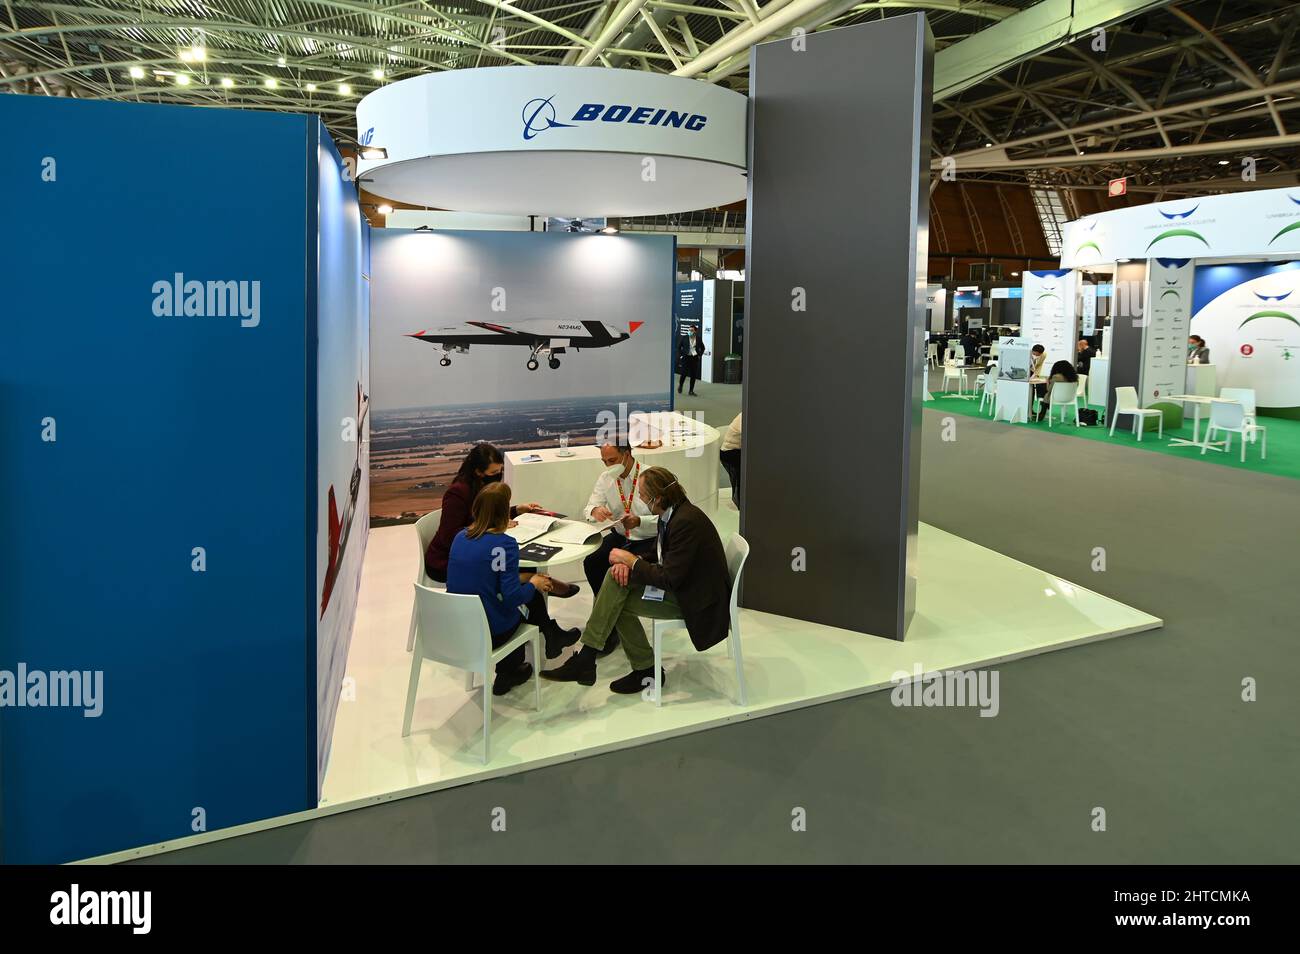 Boeing aviation and defense equipment company booth and logo at an aerospace fair Stock Photo